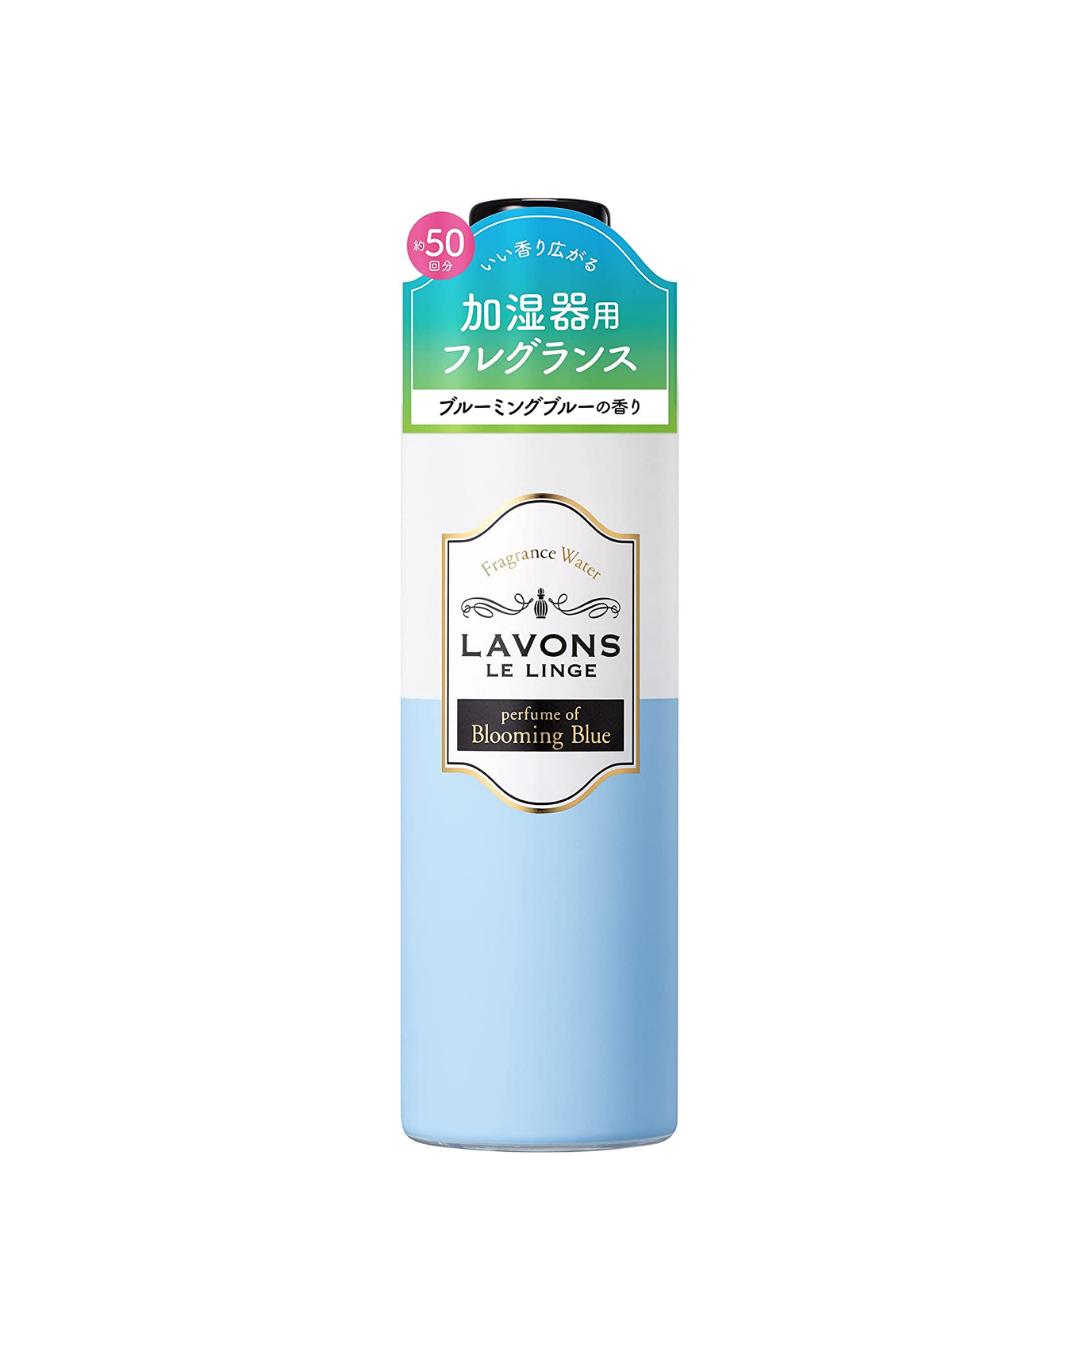 Lavons Fragrance Water Blooming Blue